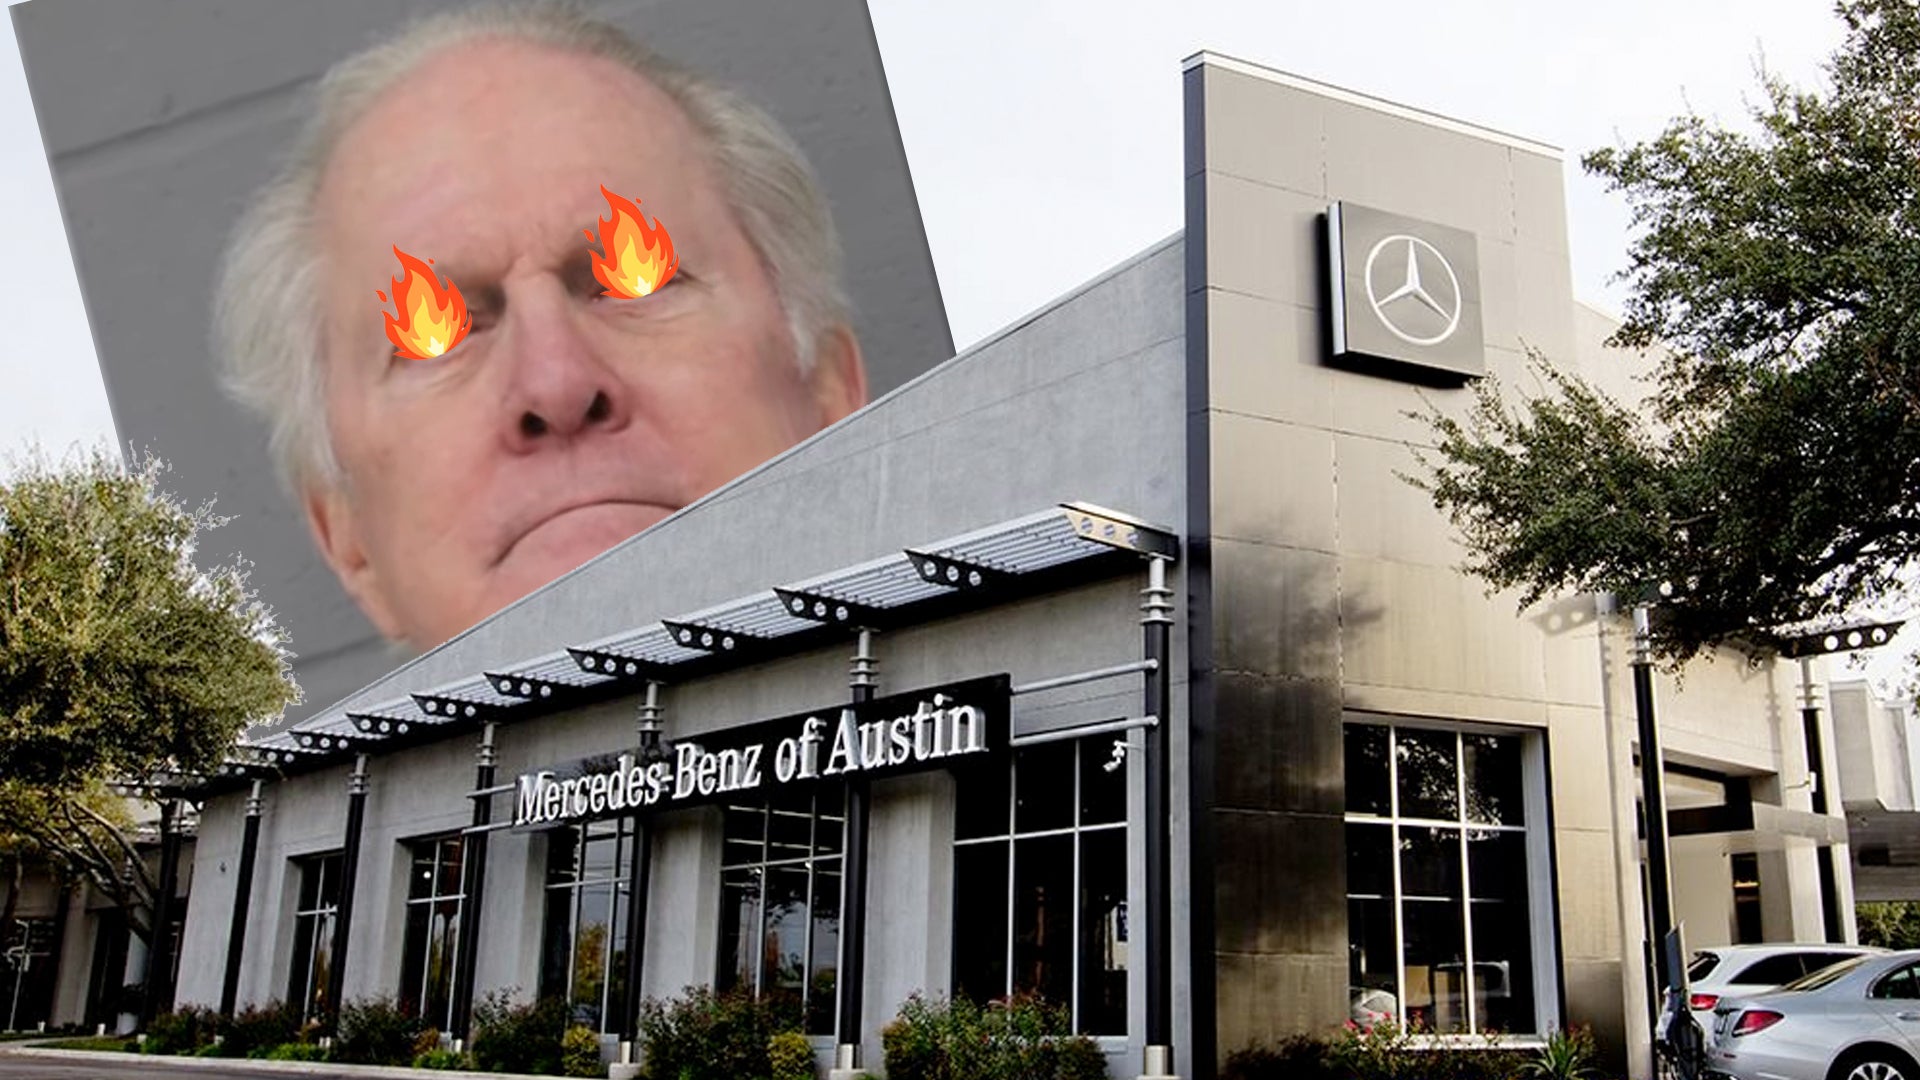 Police say that a Texas car dealership tycoon has a penchant for setting things ablaze.